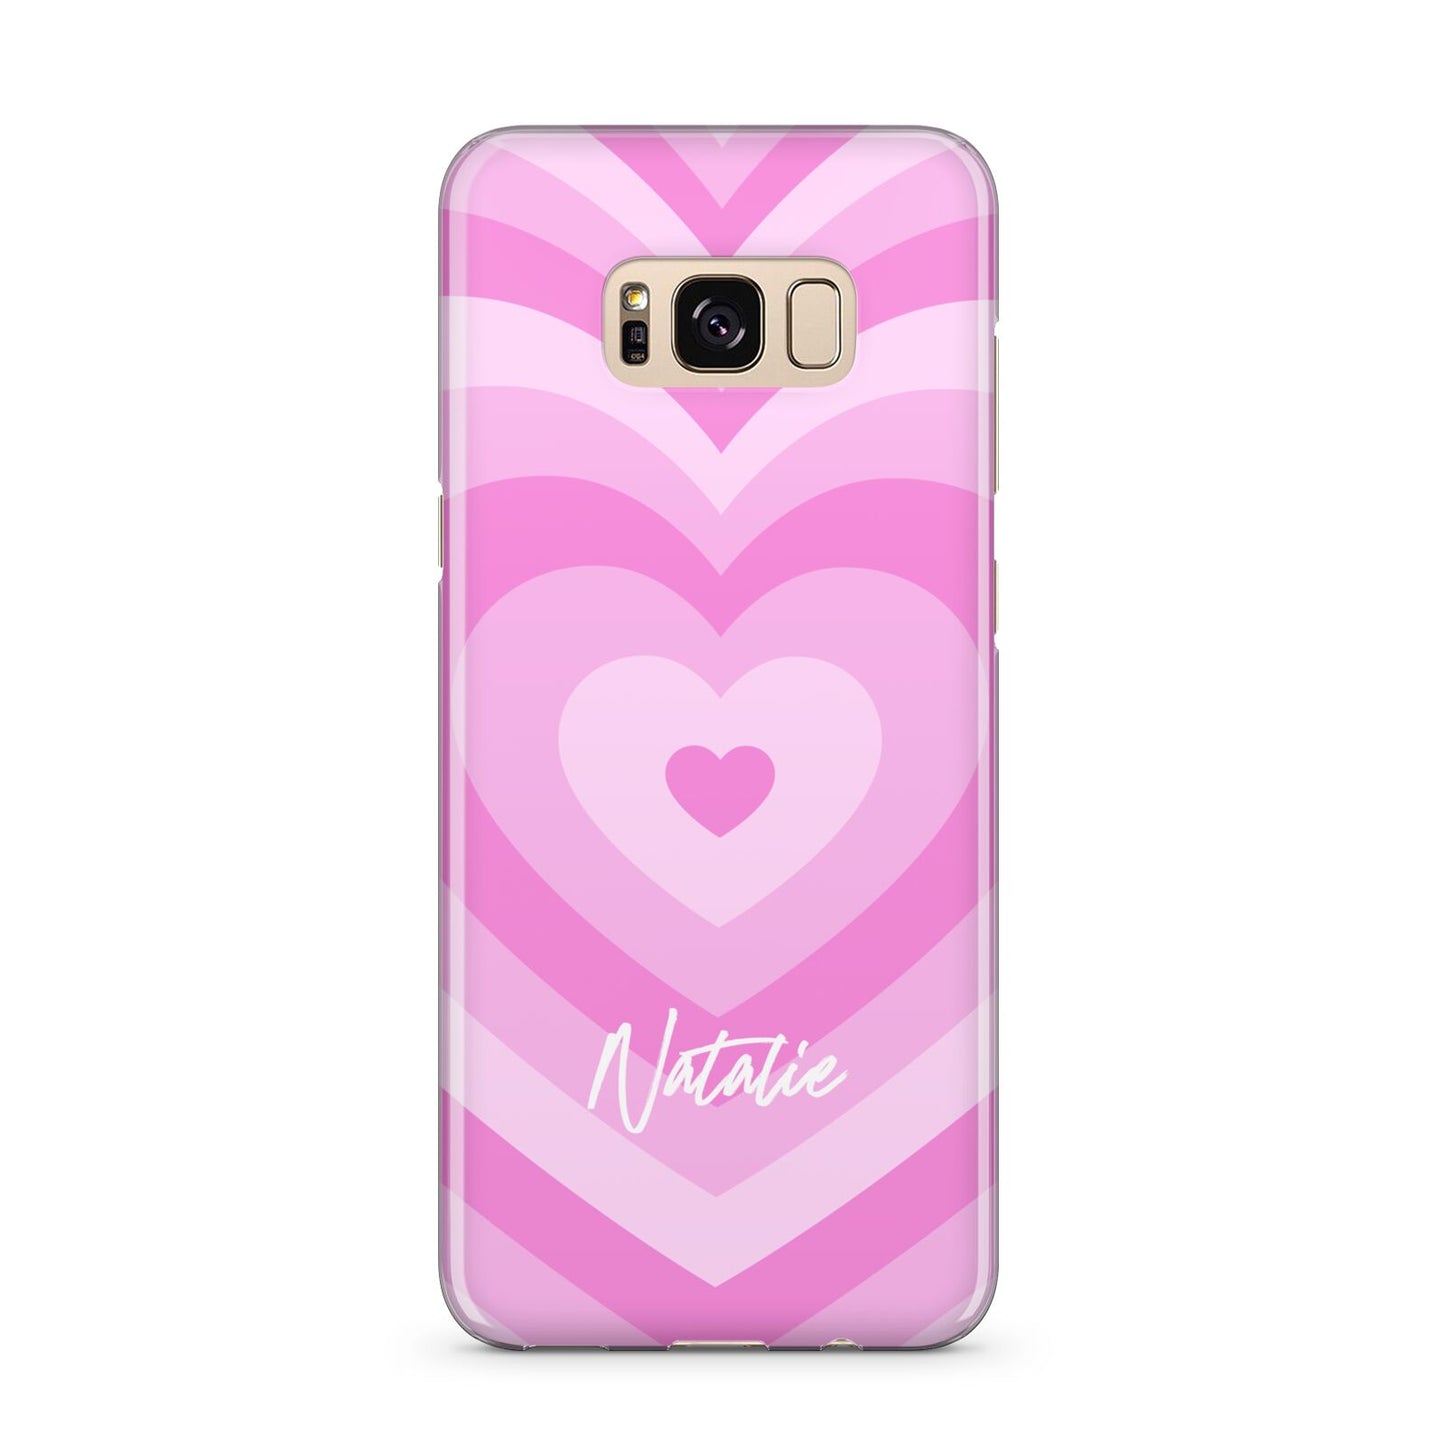 Personalised Pink Heart Samsung Galaxy S8 Plus Case